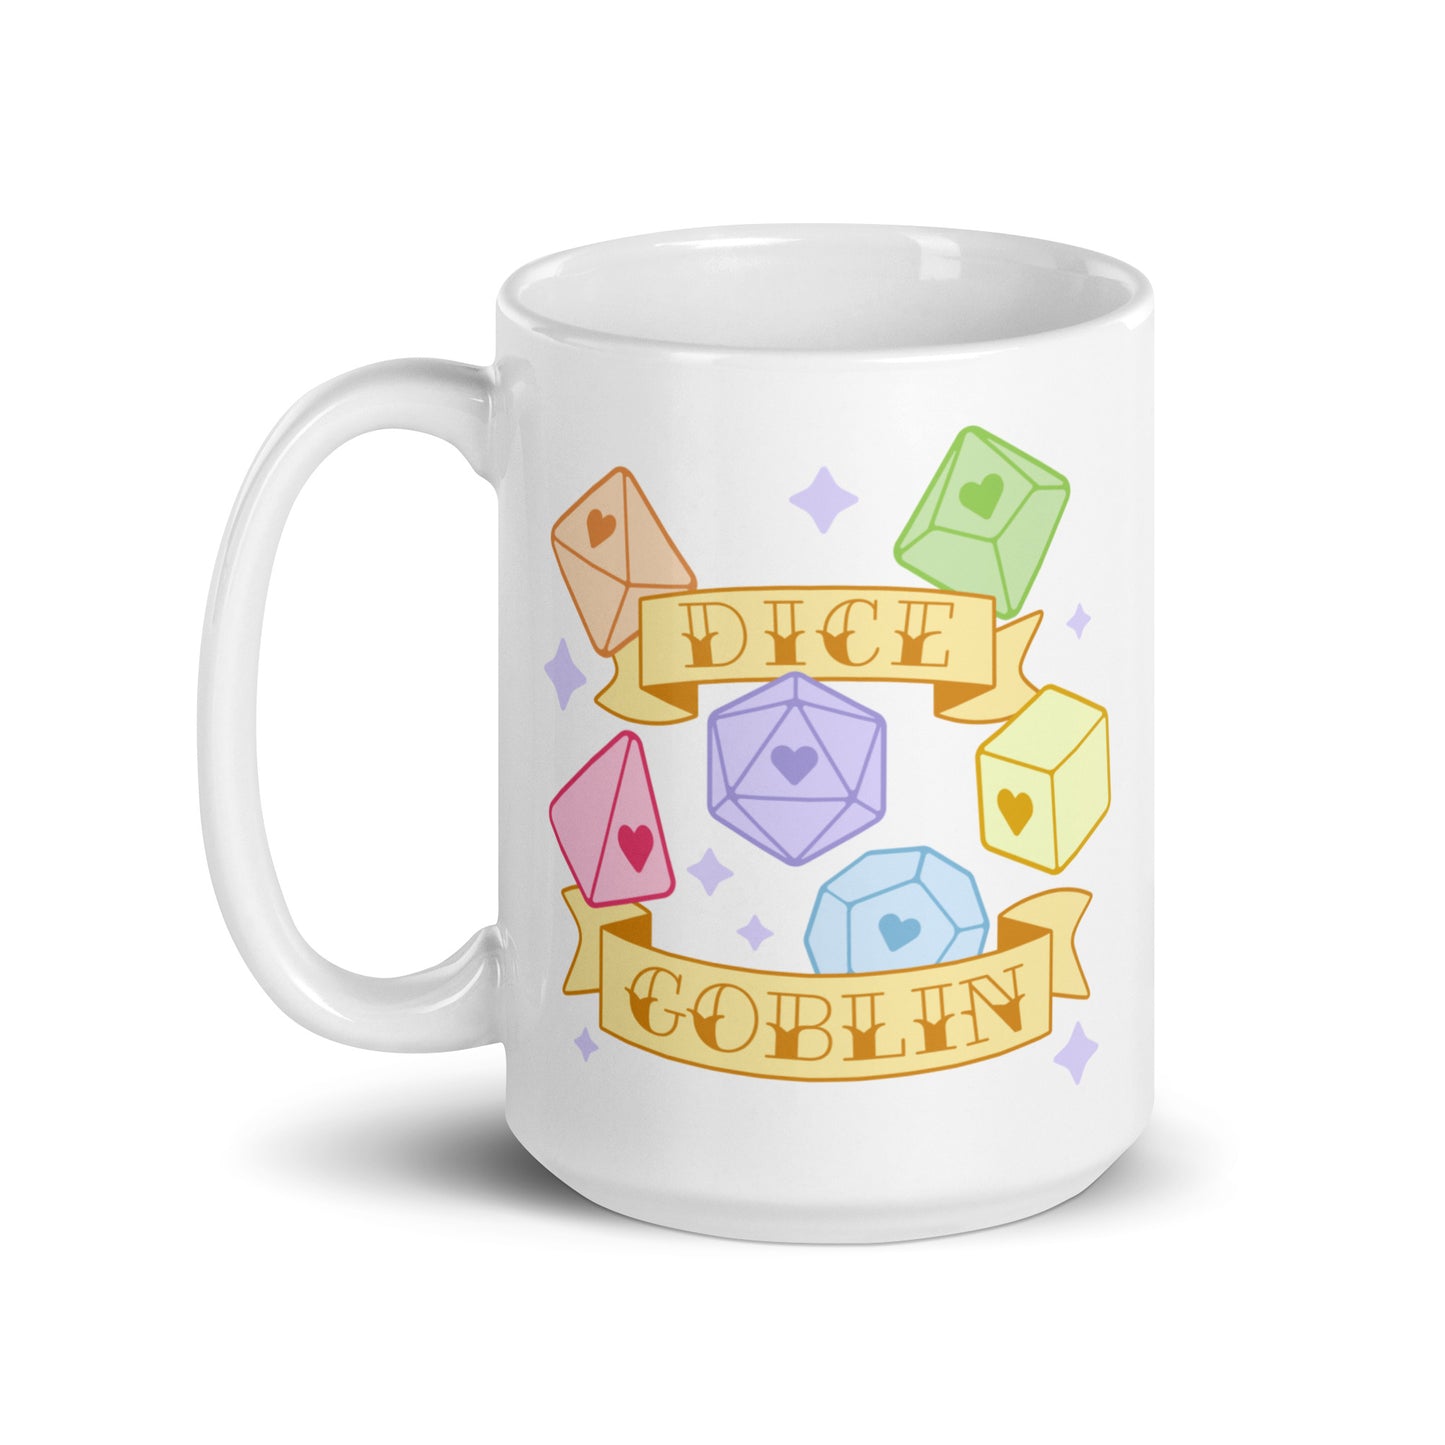 A white 15 ounce ceramic mug featuring an illustration of six polyhedral dice in pastel rainbow colors. Banners surround the dice. Text on the banners reads "Dice Goblin"